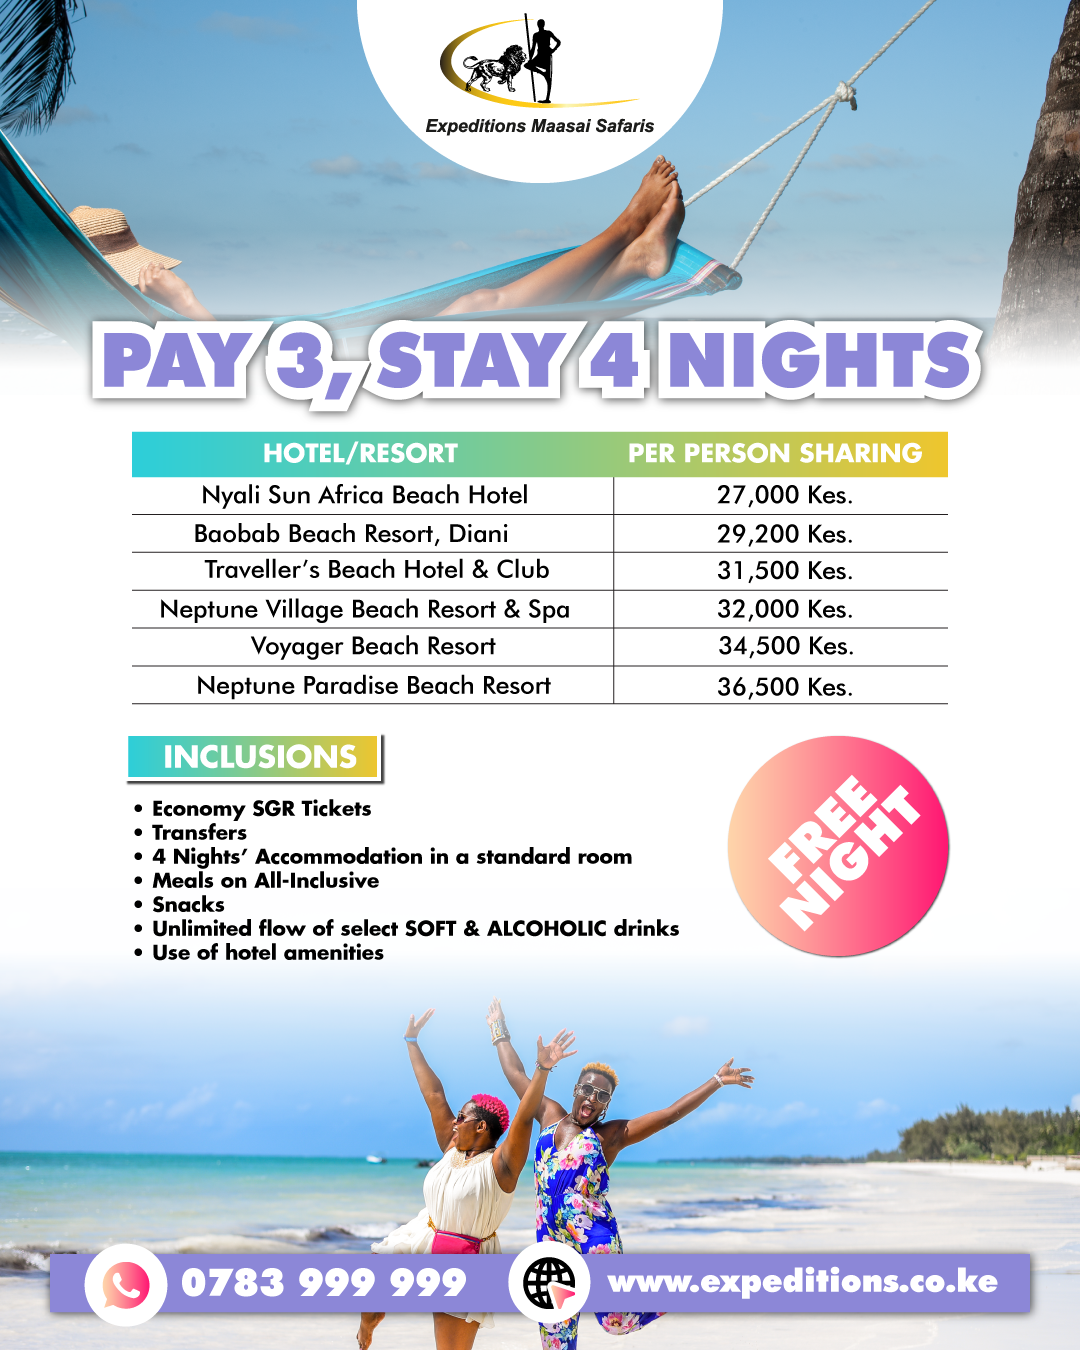 SGR Packages, Pay 3 Nights Stay for 4 Nights when you book our Mombasa SGR packages